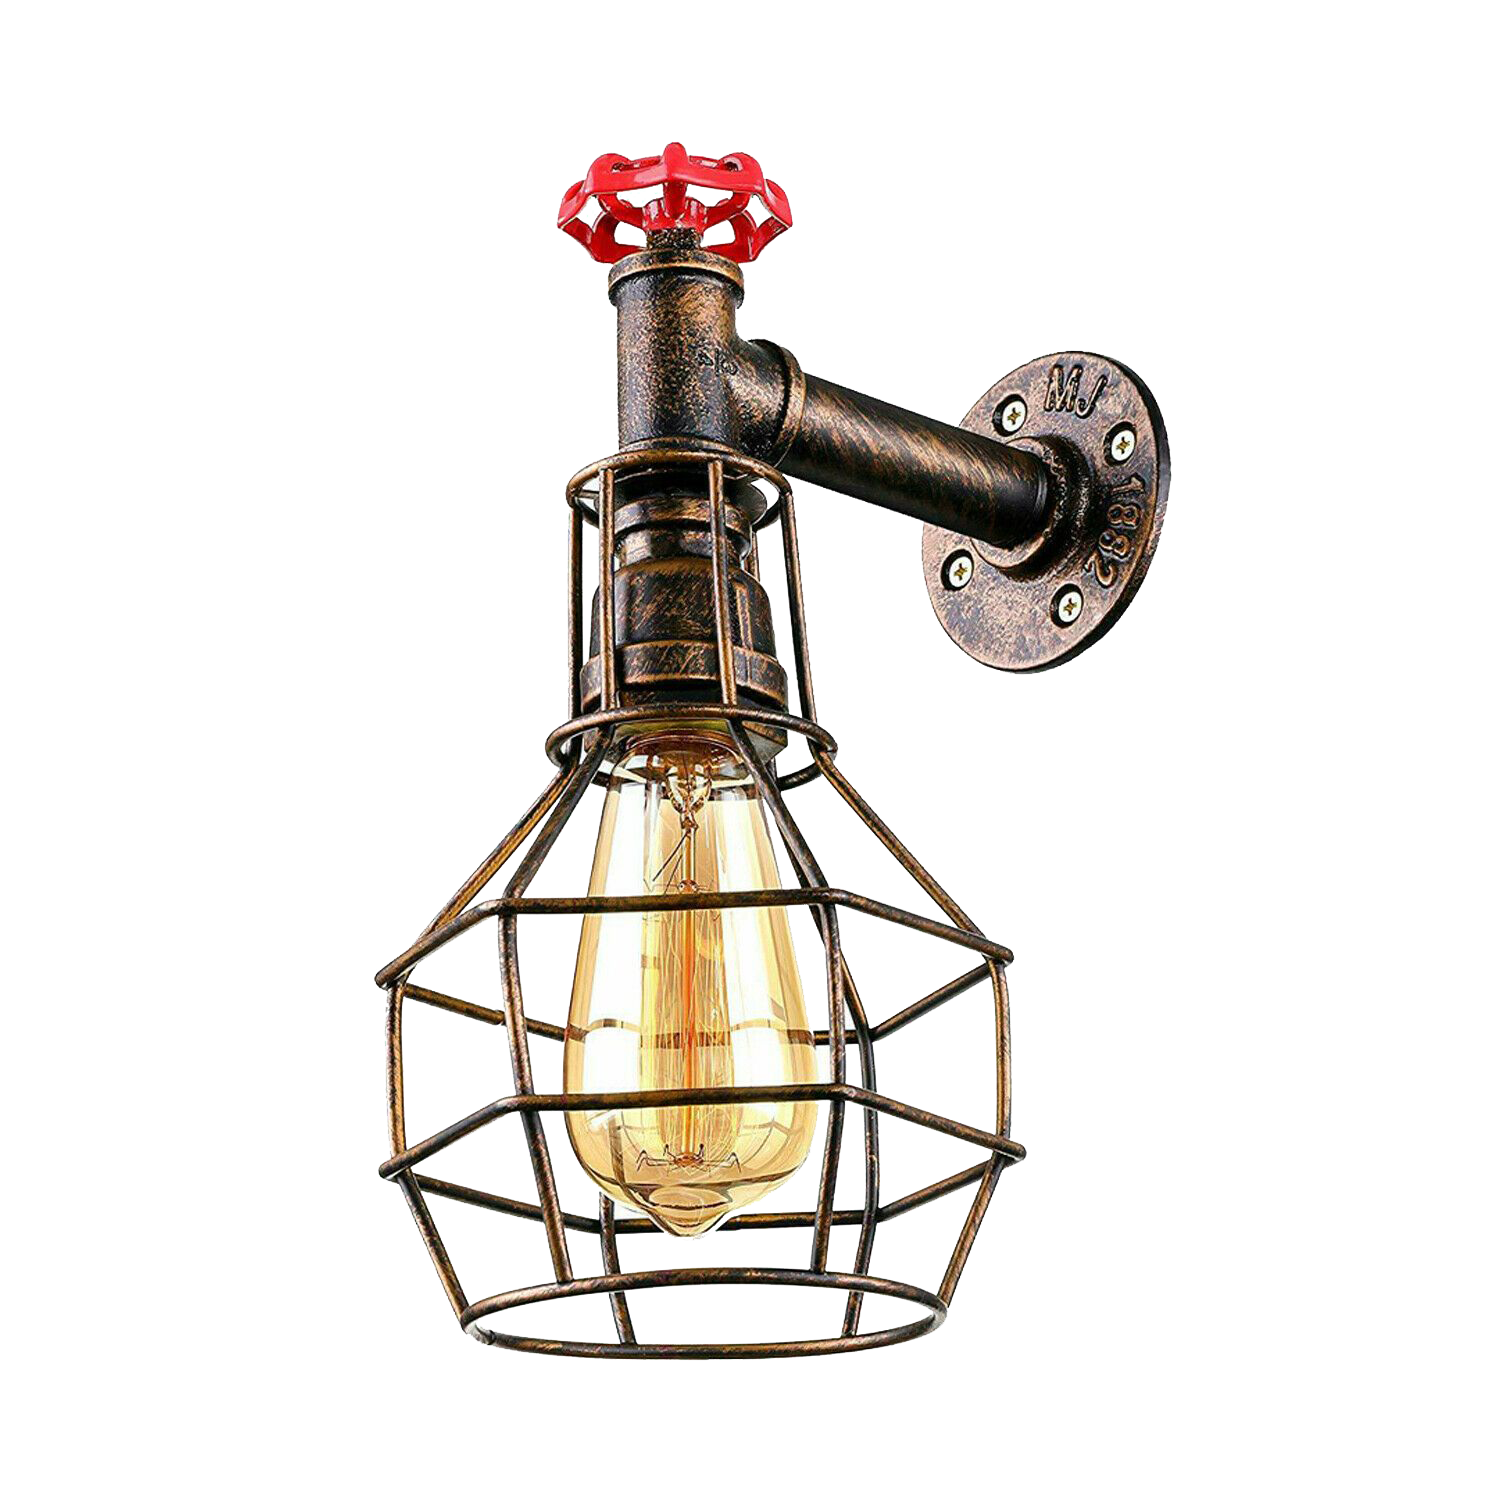 Brushed Copper Modern Industrial Retro Vintage Style Pipe Cage Wall Light Wall Lamp Fixture~1117 - LEDSone UK Ltd